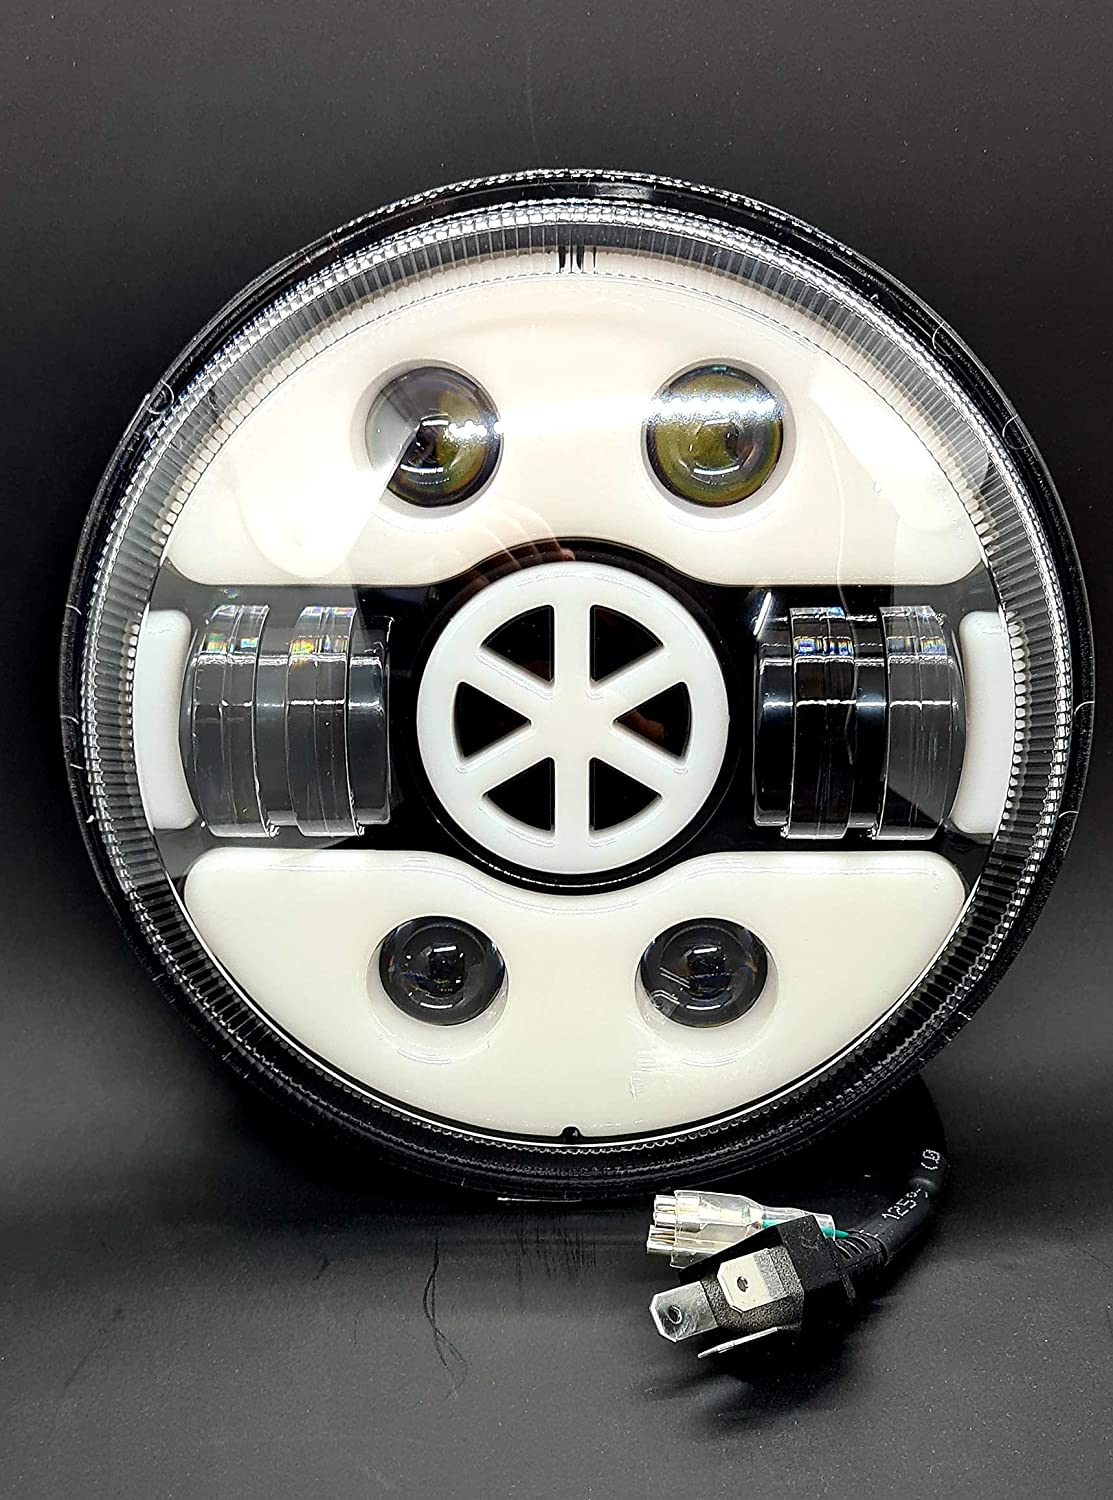 Chakra Headlight-7 Inch(6 Months Warranty) - Premium Headlights from Sparewick - Just Rs. 3200! Shop now at Sparewick